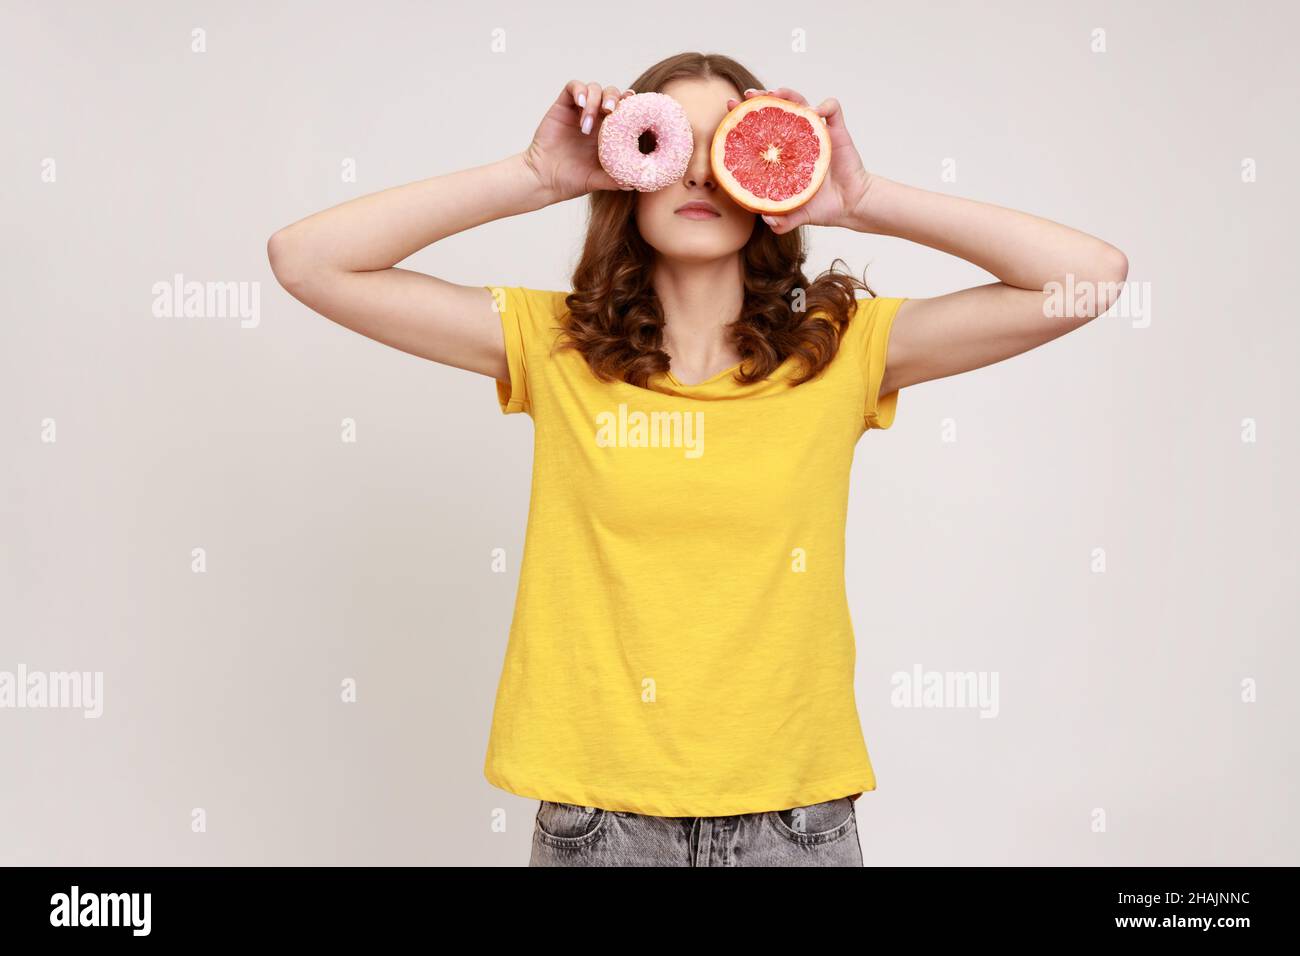 Sugary dessert vs fruits. Portrait of playful brown haired woman in yellow T-shirt covering eyes with fresh grapefruit and sweet doughnut, junk food. Indoor studio shot isolated on gray background. Stock Photo